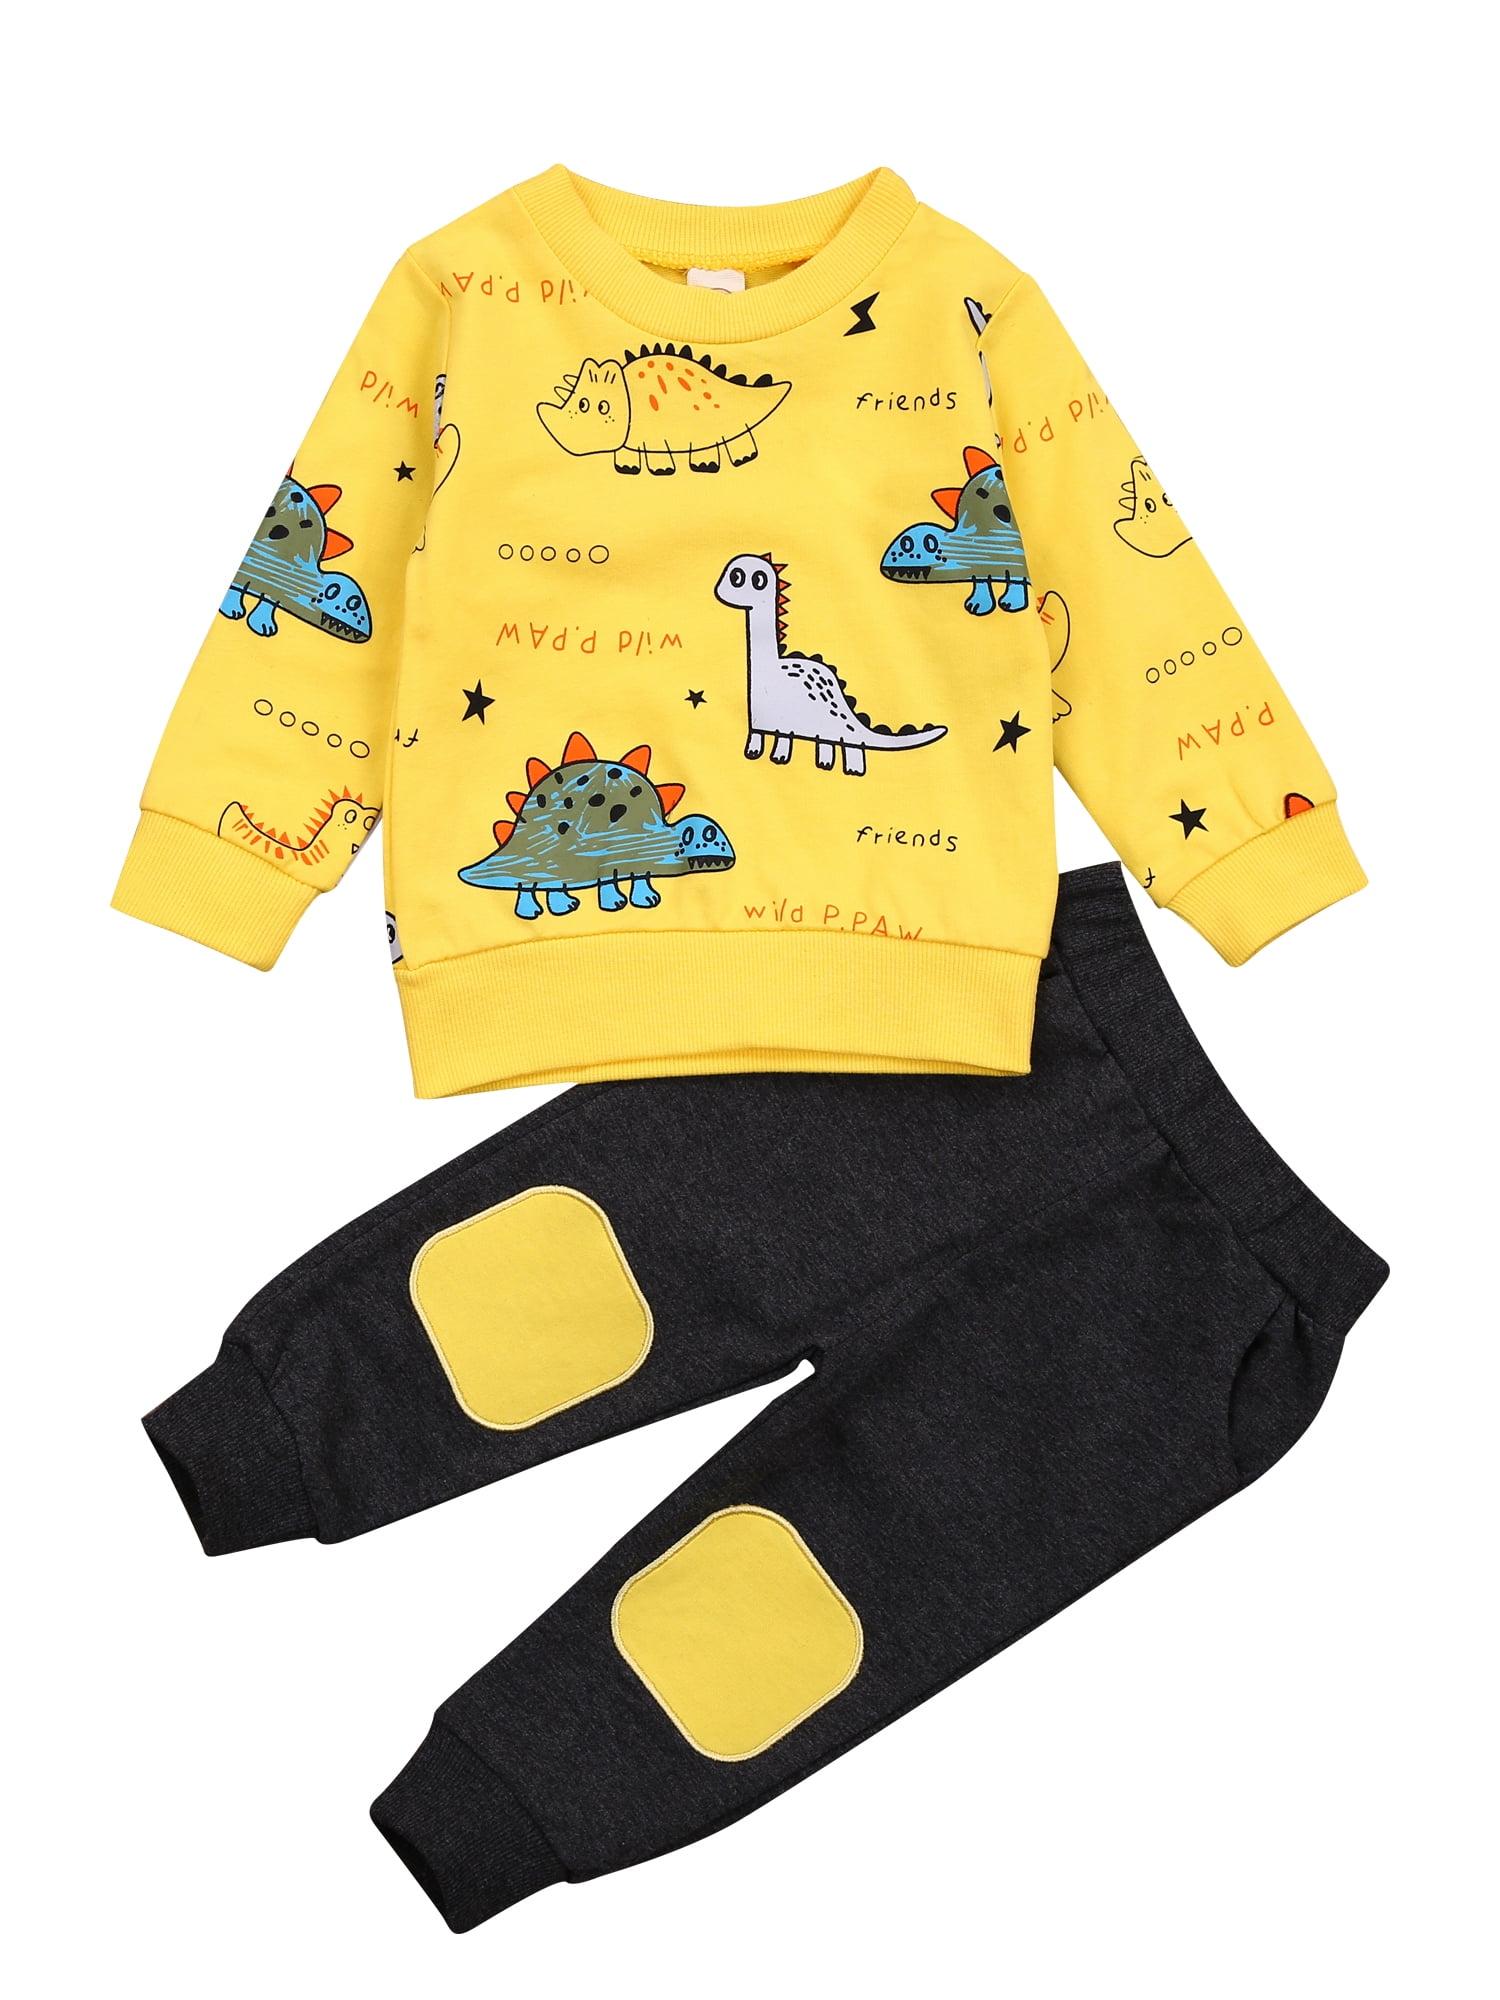 Toddler Kids Outfit Dinosaur Printing Boy Girl Spring Cotton Autumn  Sweatshirt Lined Tops Pants Clothes New Year Winter Warm Tang Suit Outfits  Set